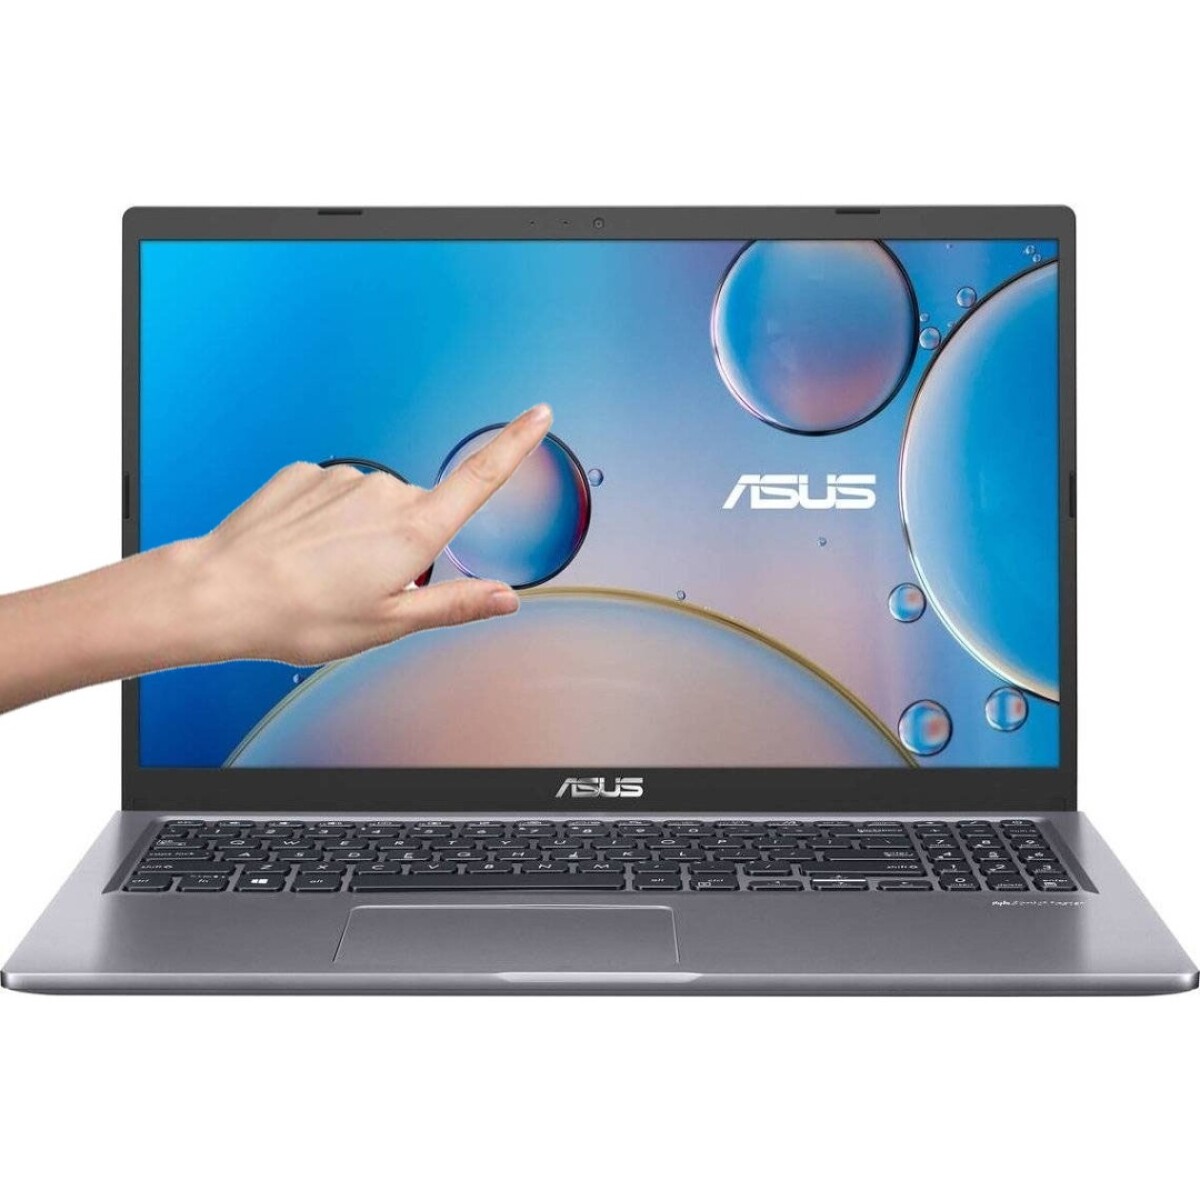 Notebook Asus Core I5 4.2GHZ, 8GB, 512GB Ssd, 15.6" Fhd Touch - 001 